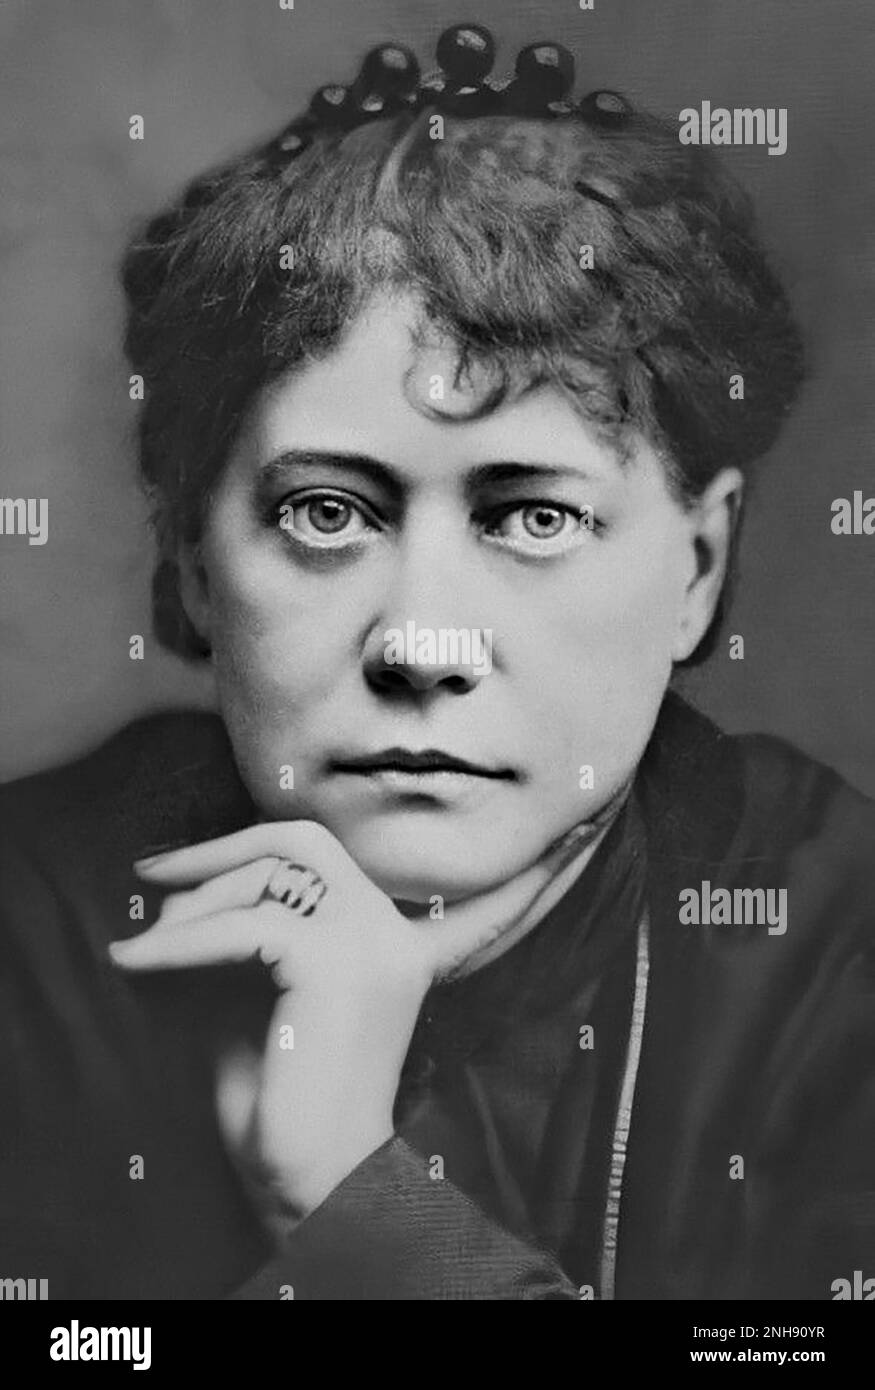 Helena Petrovna Blavatsky, a.k.a. Madame Blavatsky (1831-1891) was a Russian writer who co-founded the Theosophical Society in 1875. She gained an international following as the leading theoretician of Theosophy. Theosophy is an esoteric movement that draws its teachings from Blavatsky's writings and from esoteric literature influenced by Neoplatonism, Hinduism, and Buddhism. Some prominent people involved with the movement included Thomas Edison, Alfred Russel Wallace, William Crookes, Hilma af Klint, Wassily Kandinsky, Piet Mondrian, and William Butler Yeats, to name a few. Stock Photo